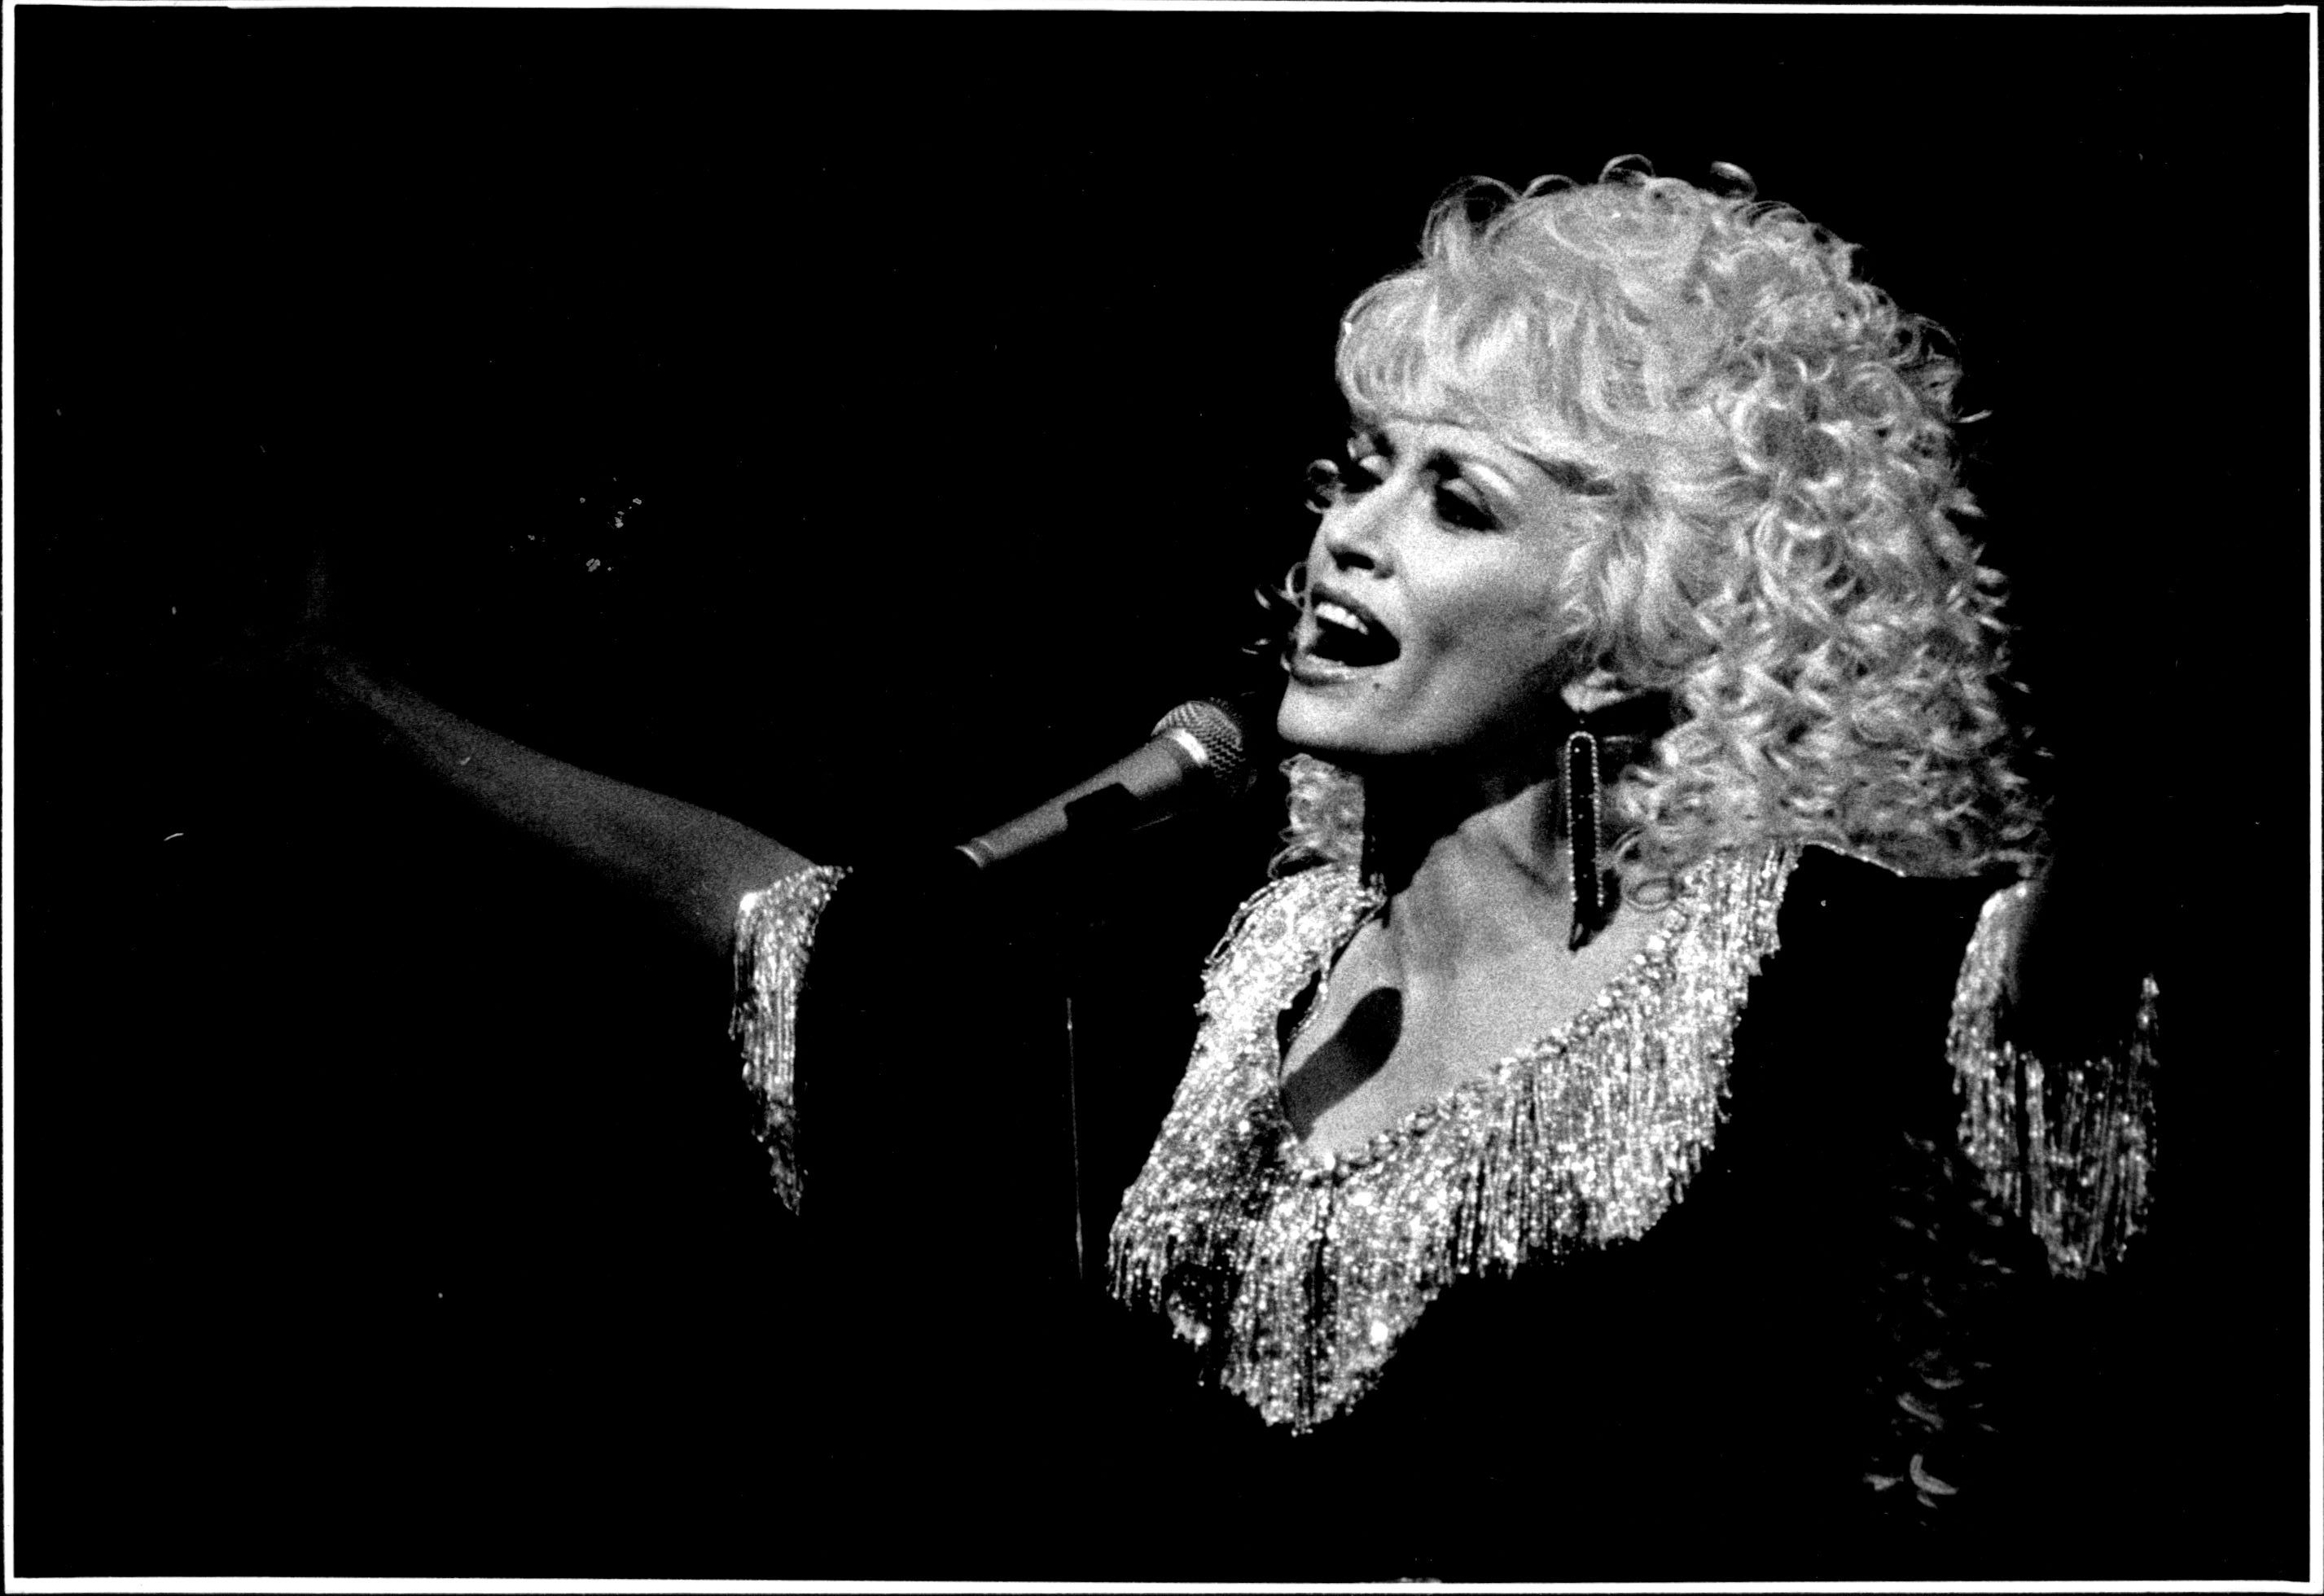 Dolly Parton in concert at The Sydney Entertainment Centre on February 16, 1987.